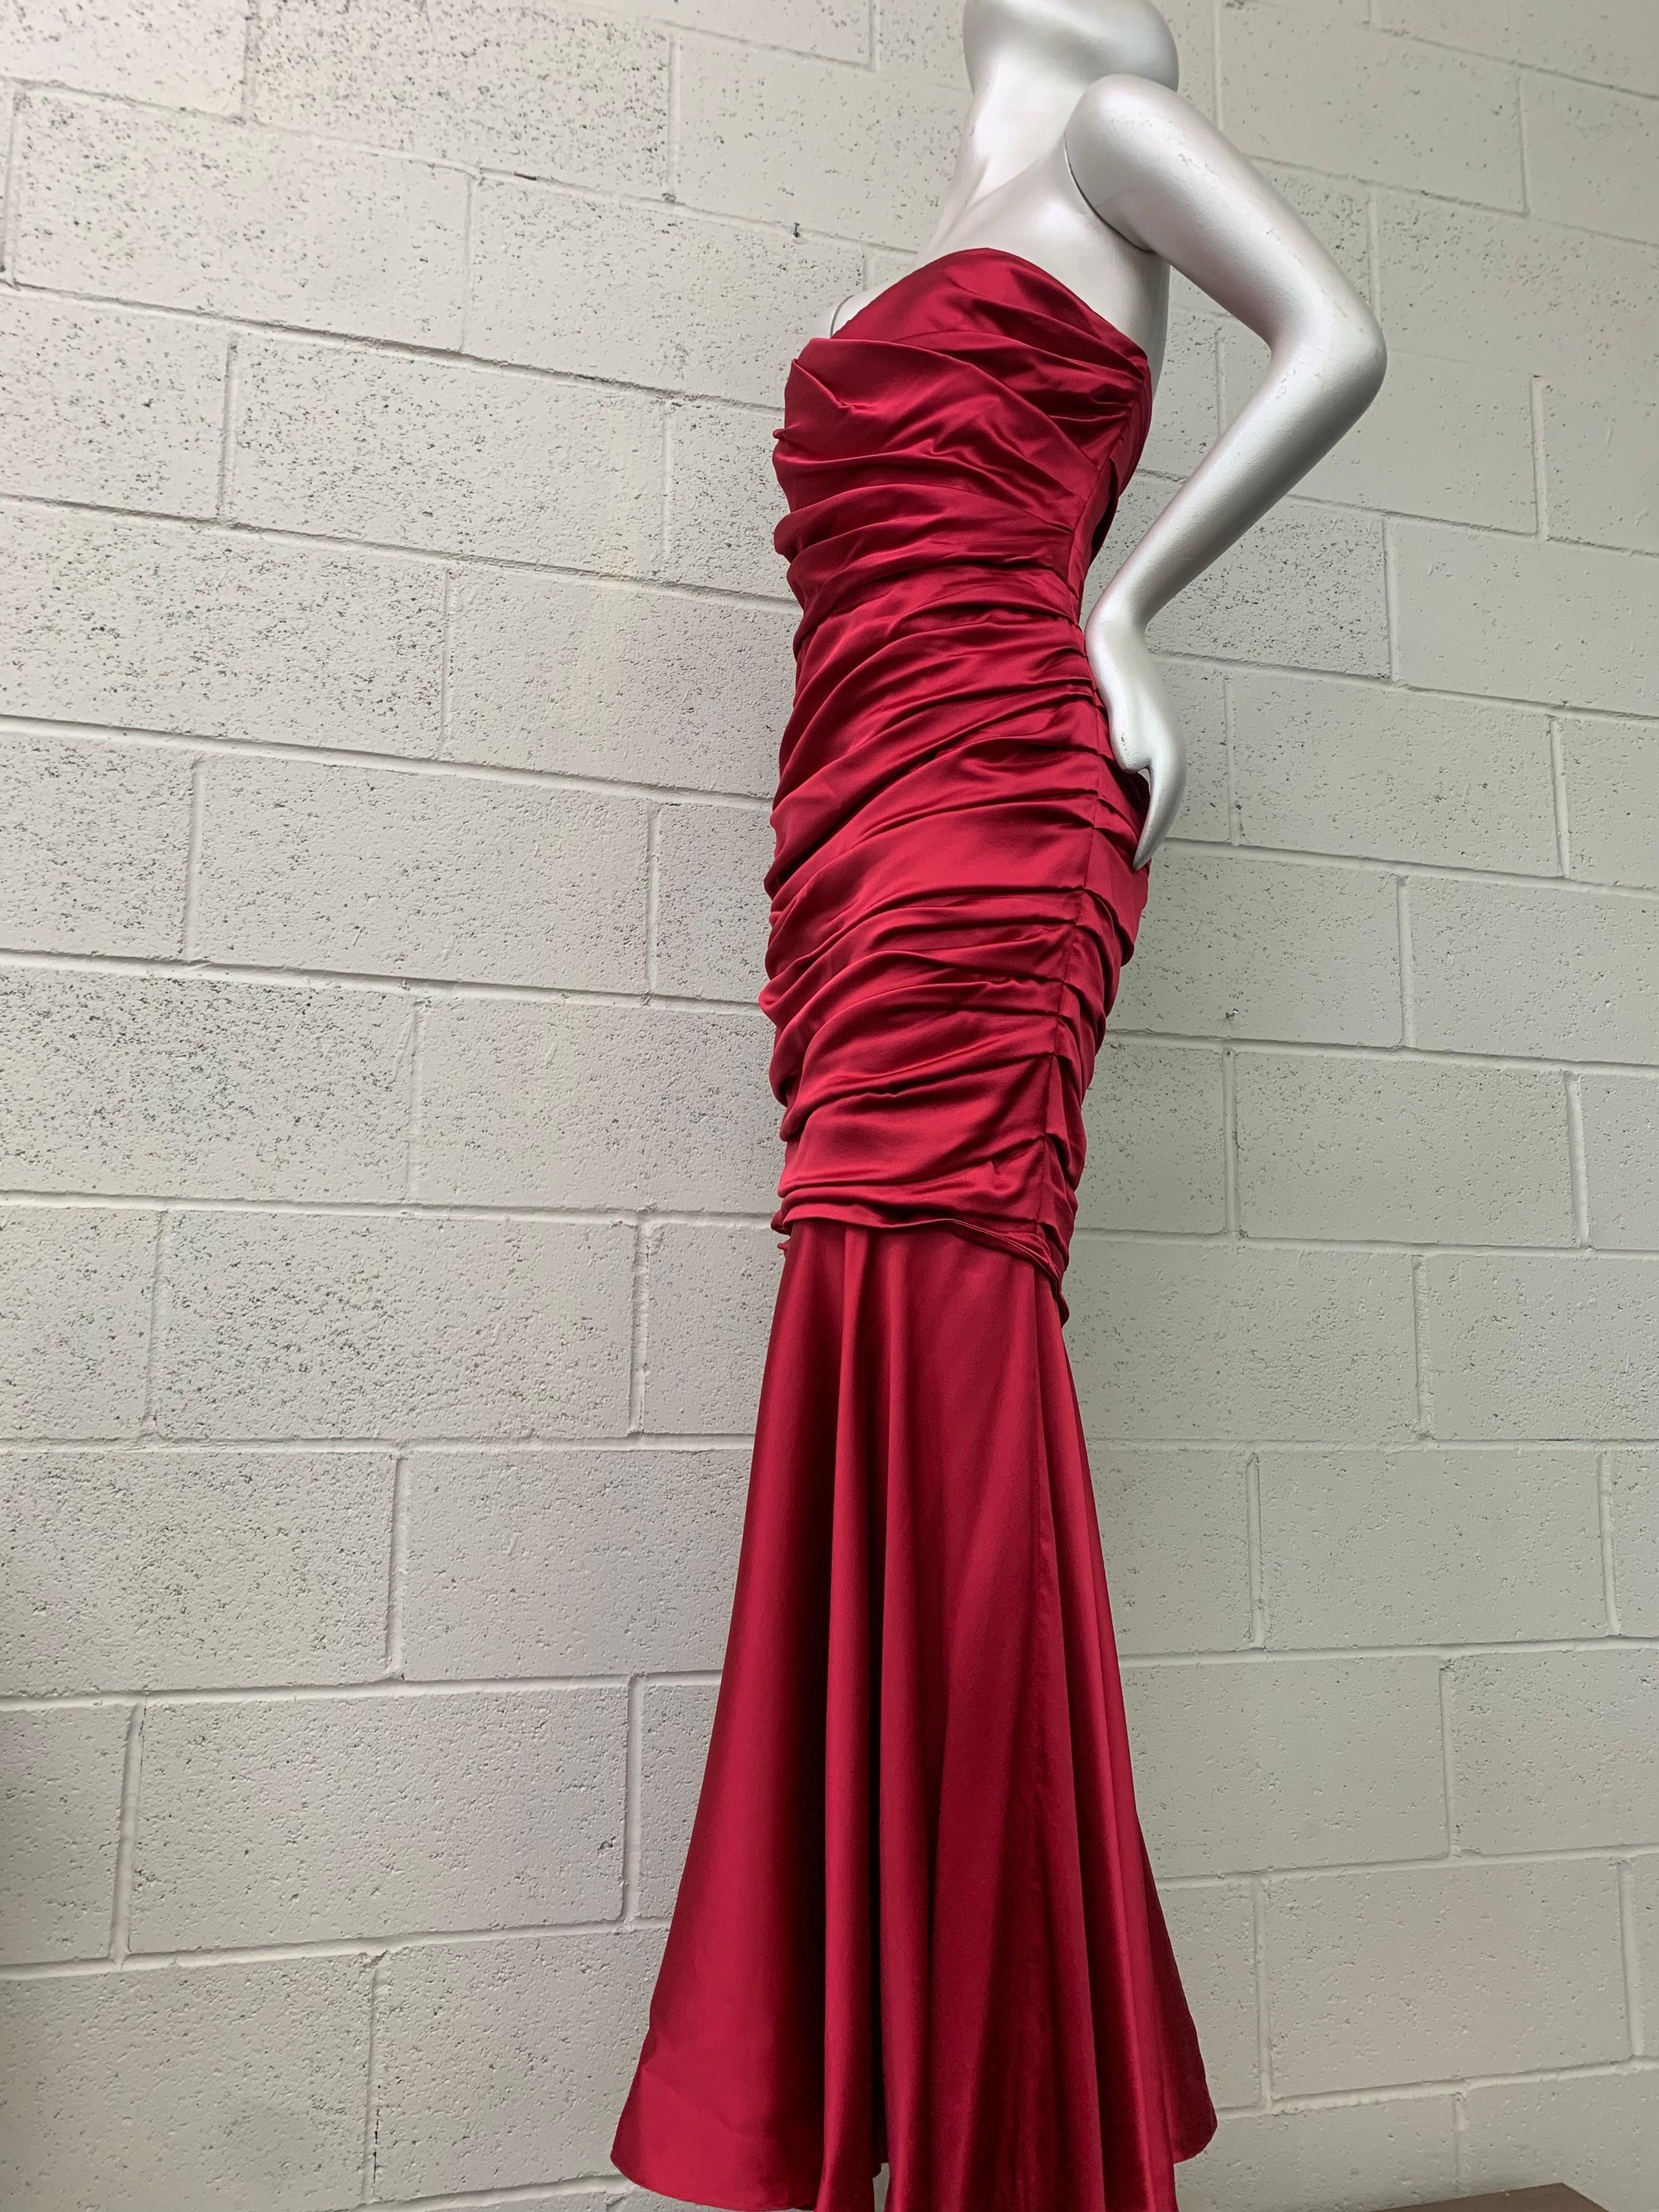 Women's Dolce & Gabbana Red Satin Strapless Corset Gown w Fishtail Hem & Ruched Bodice For Sale